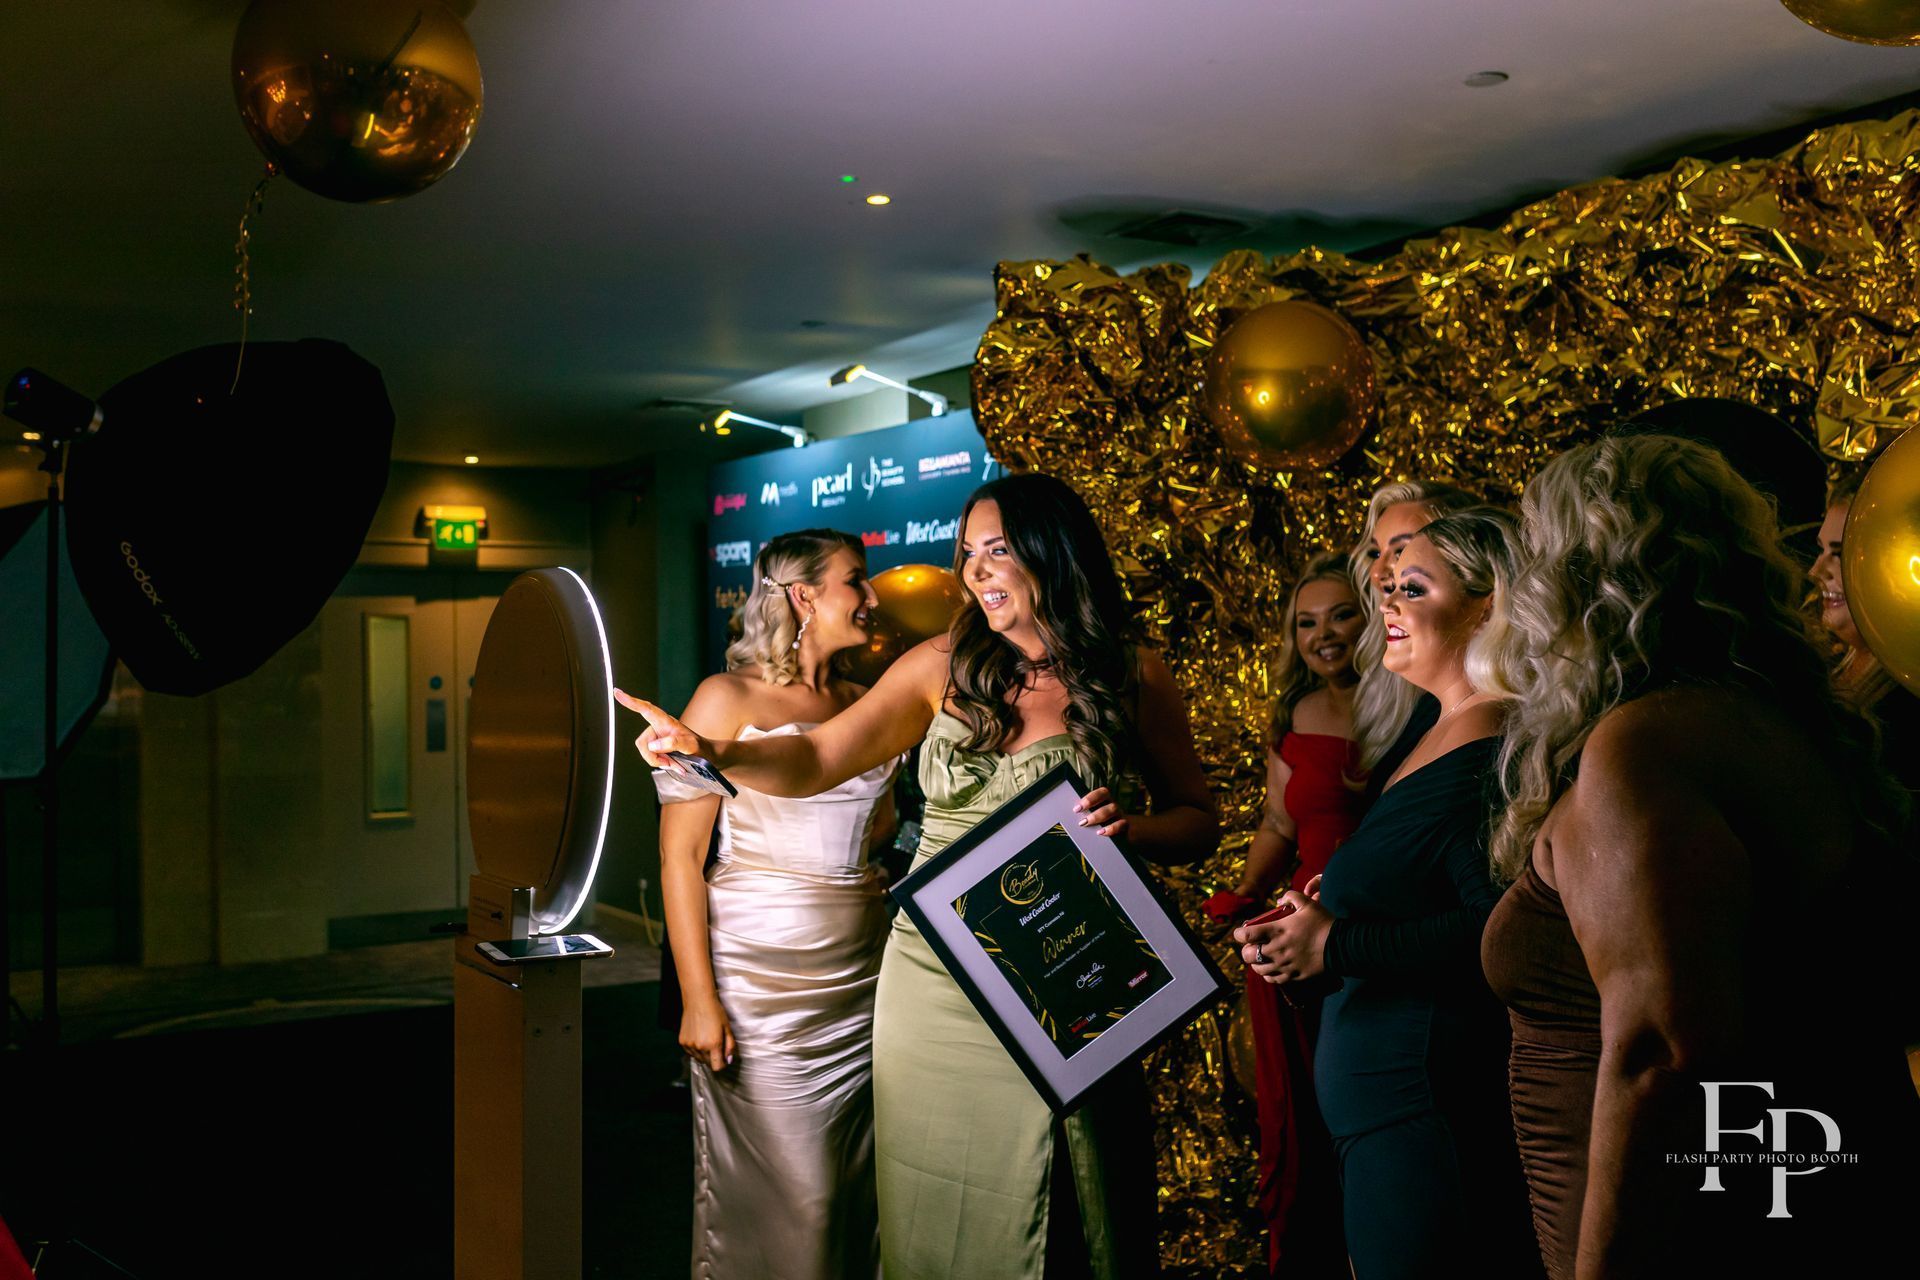 A group of women in formal dresses taking selfies in the Selfie Photo Booth.